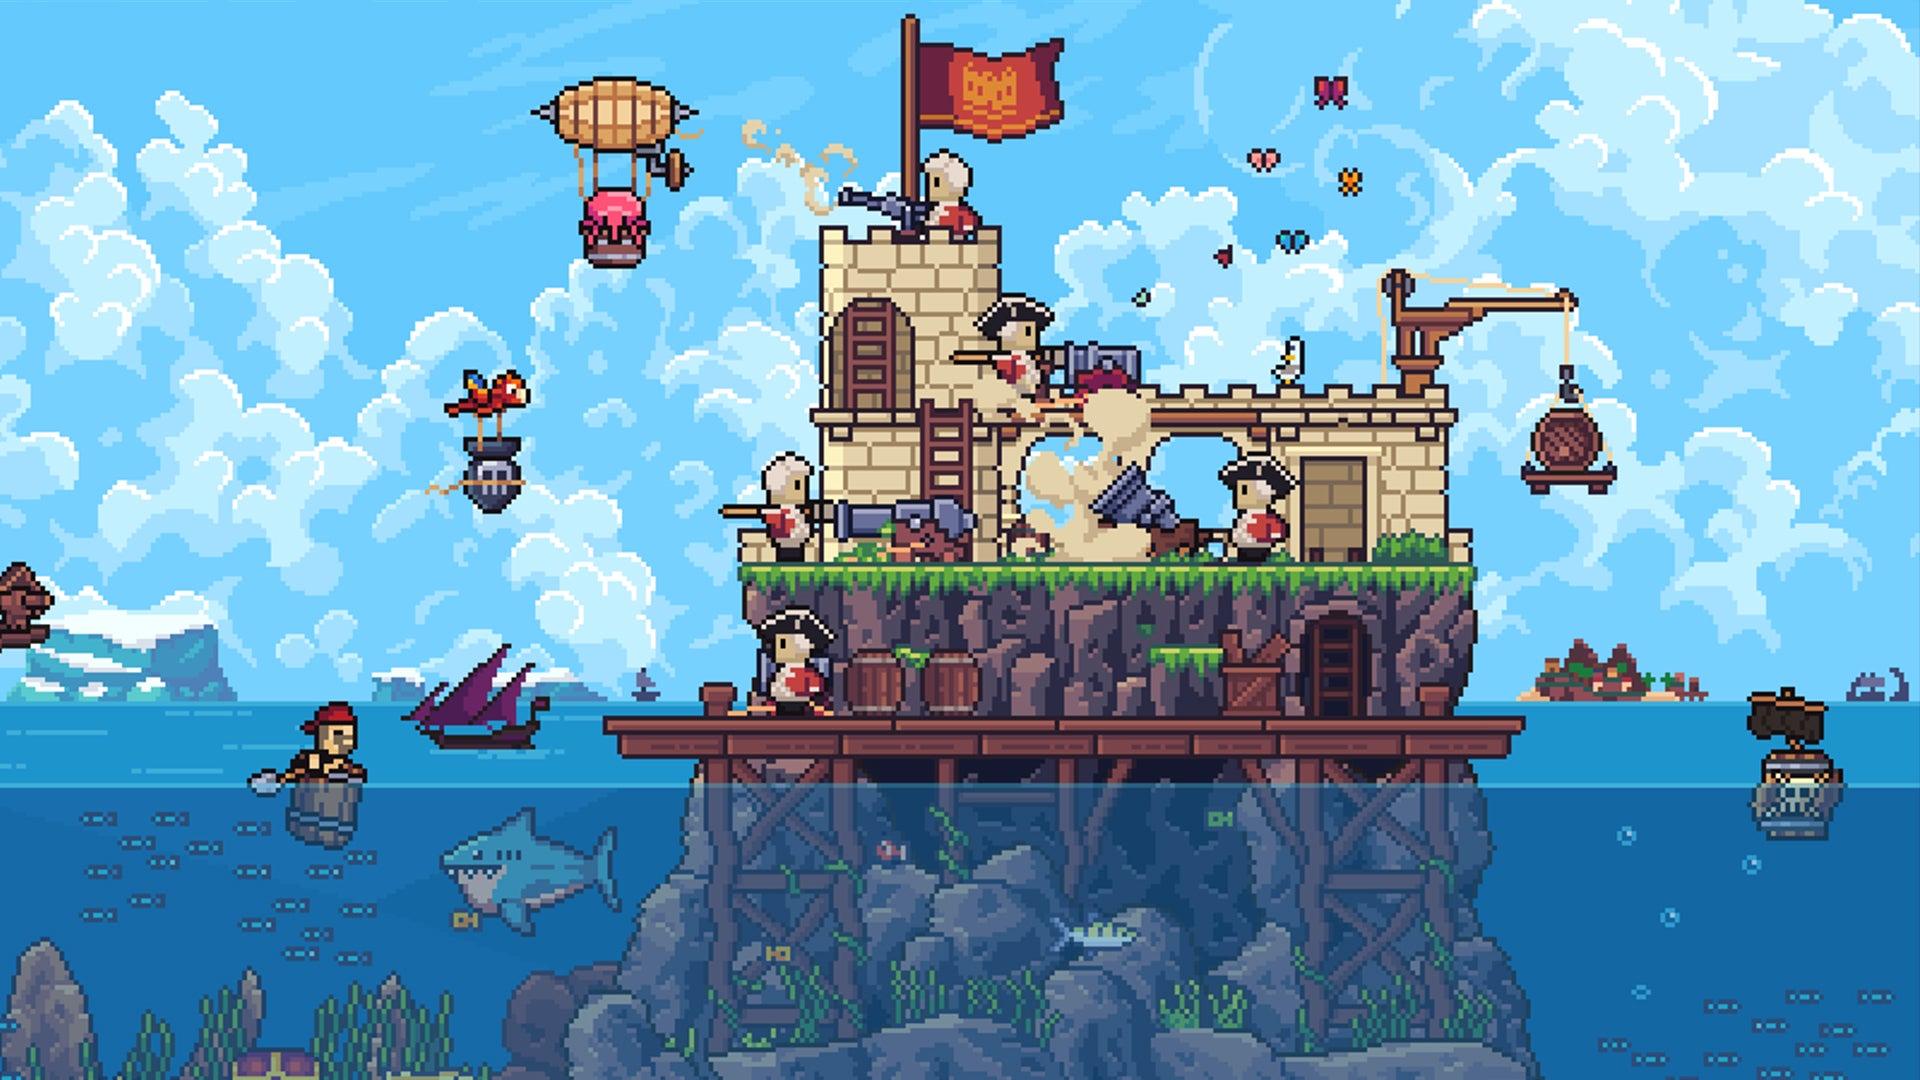 A Pixel Art Pirate Adventure Launches in Early Access